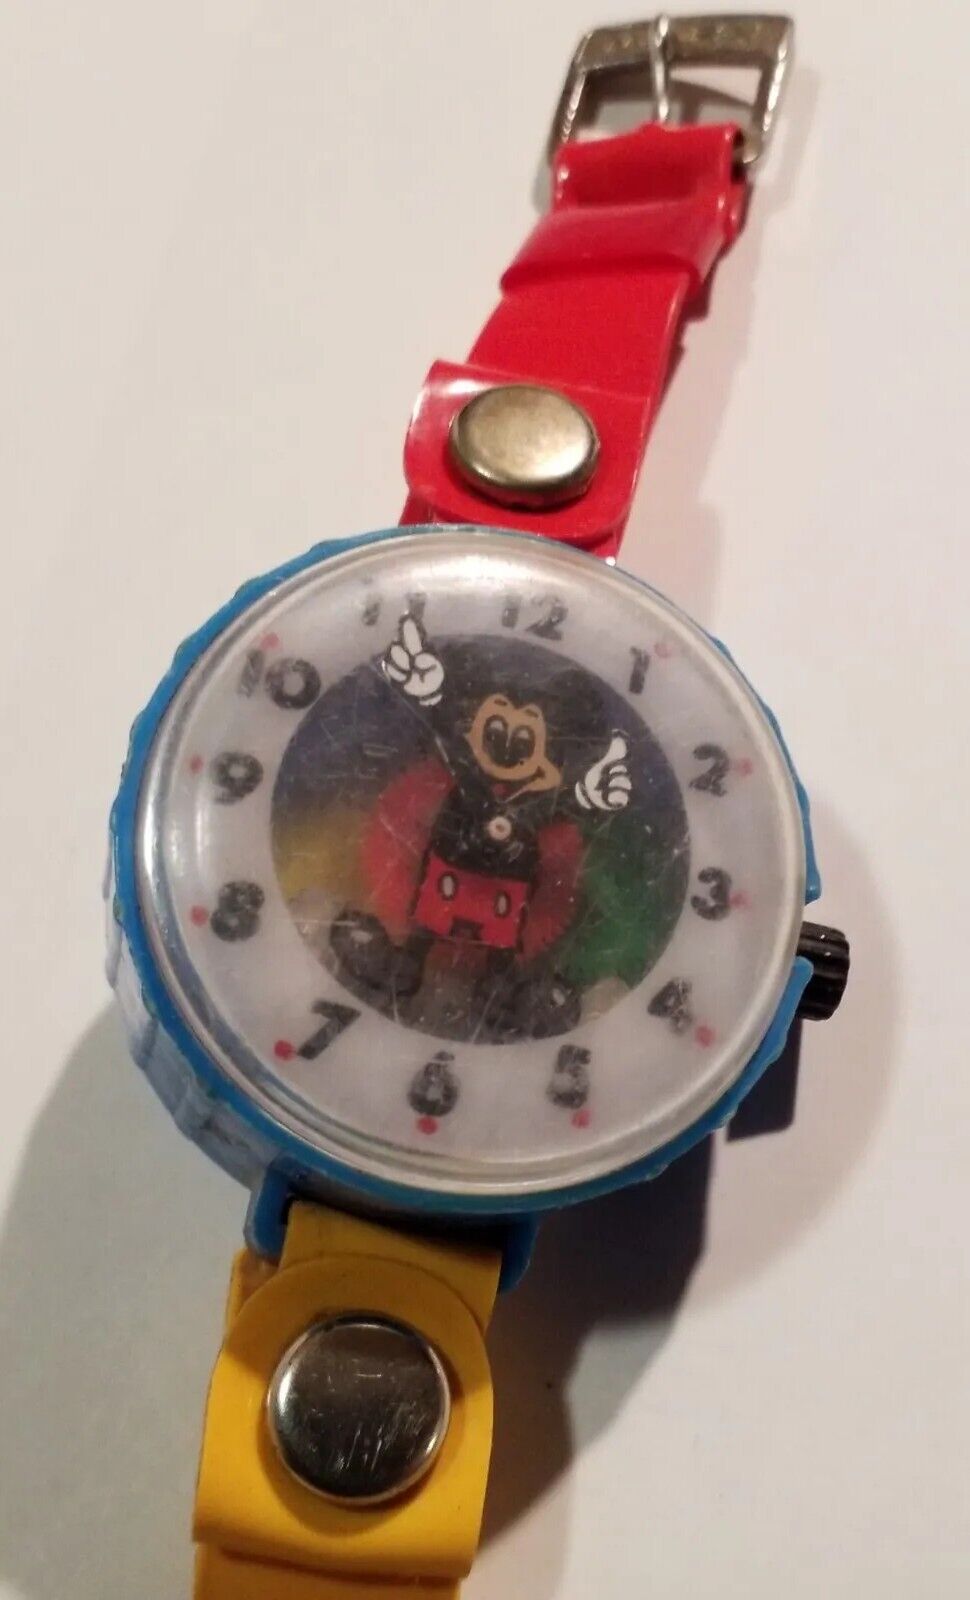 60s-70s Marx Toys Disney Wind-Up Mickey Mouse Watch MCMLXXIII Visible Gears Blue